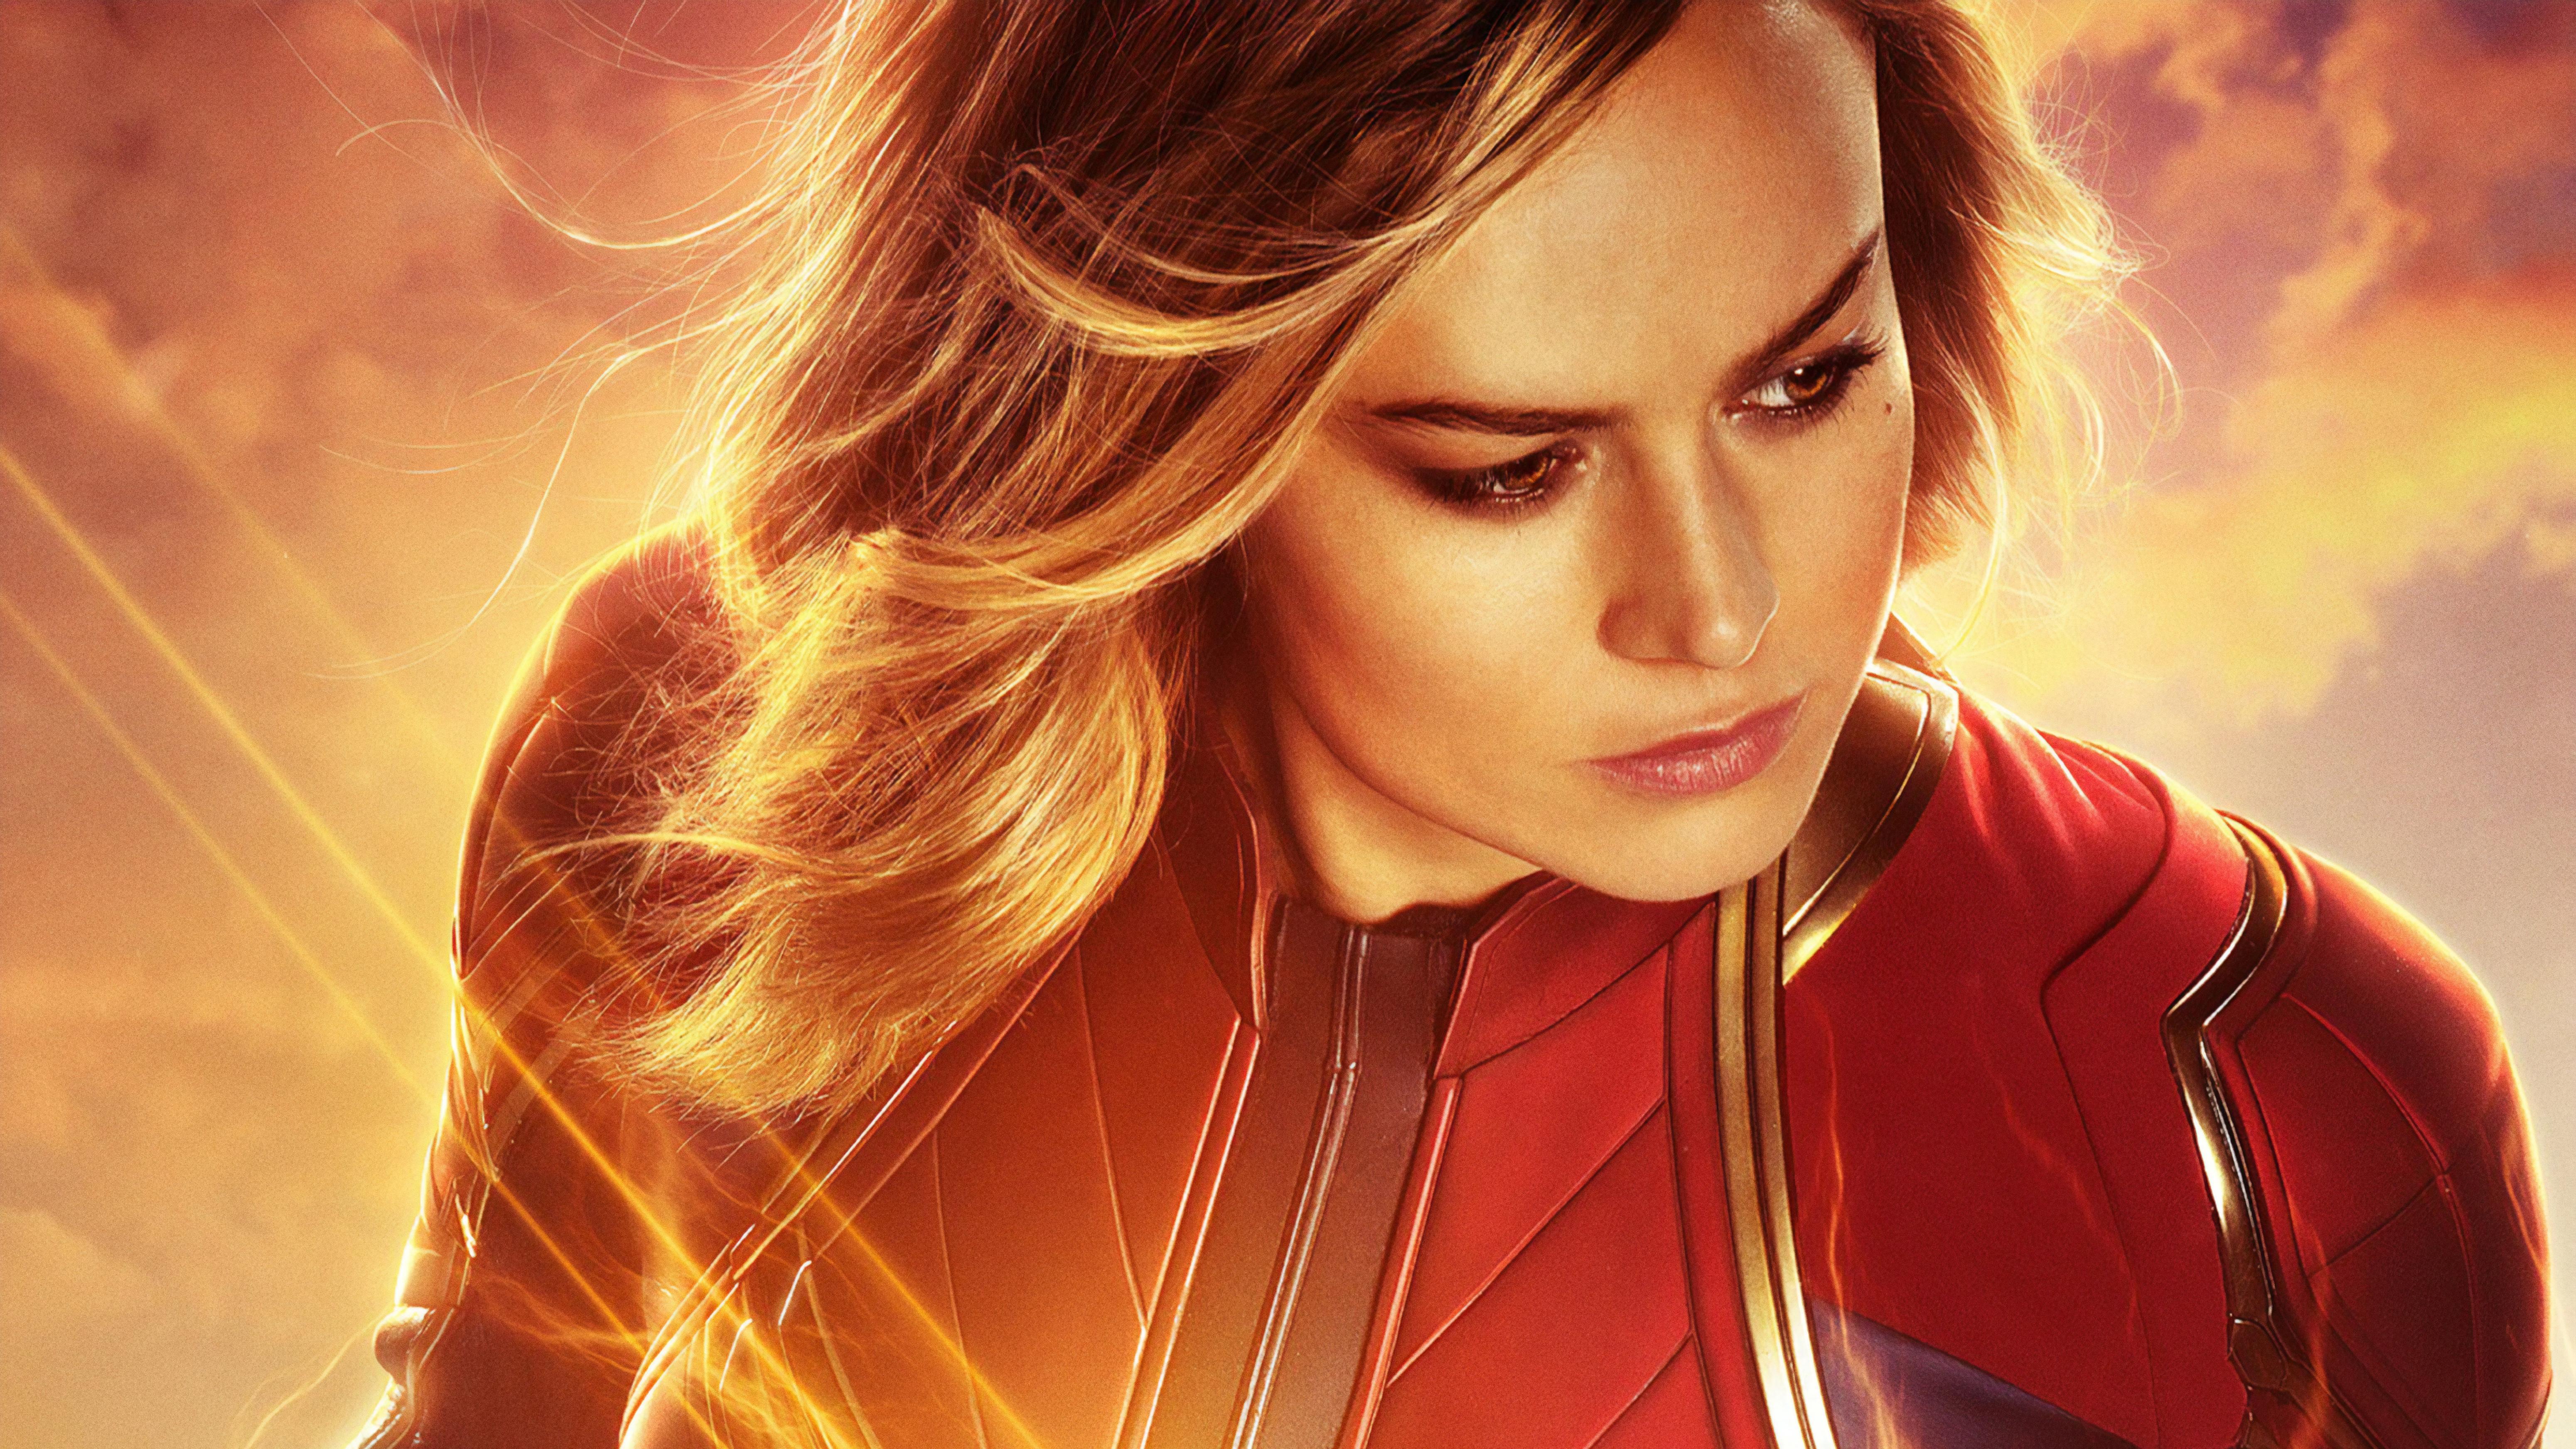 Download】Top New Captain Marvel 2019 Movie Wallpaper [Free]